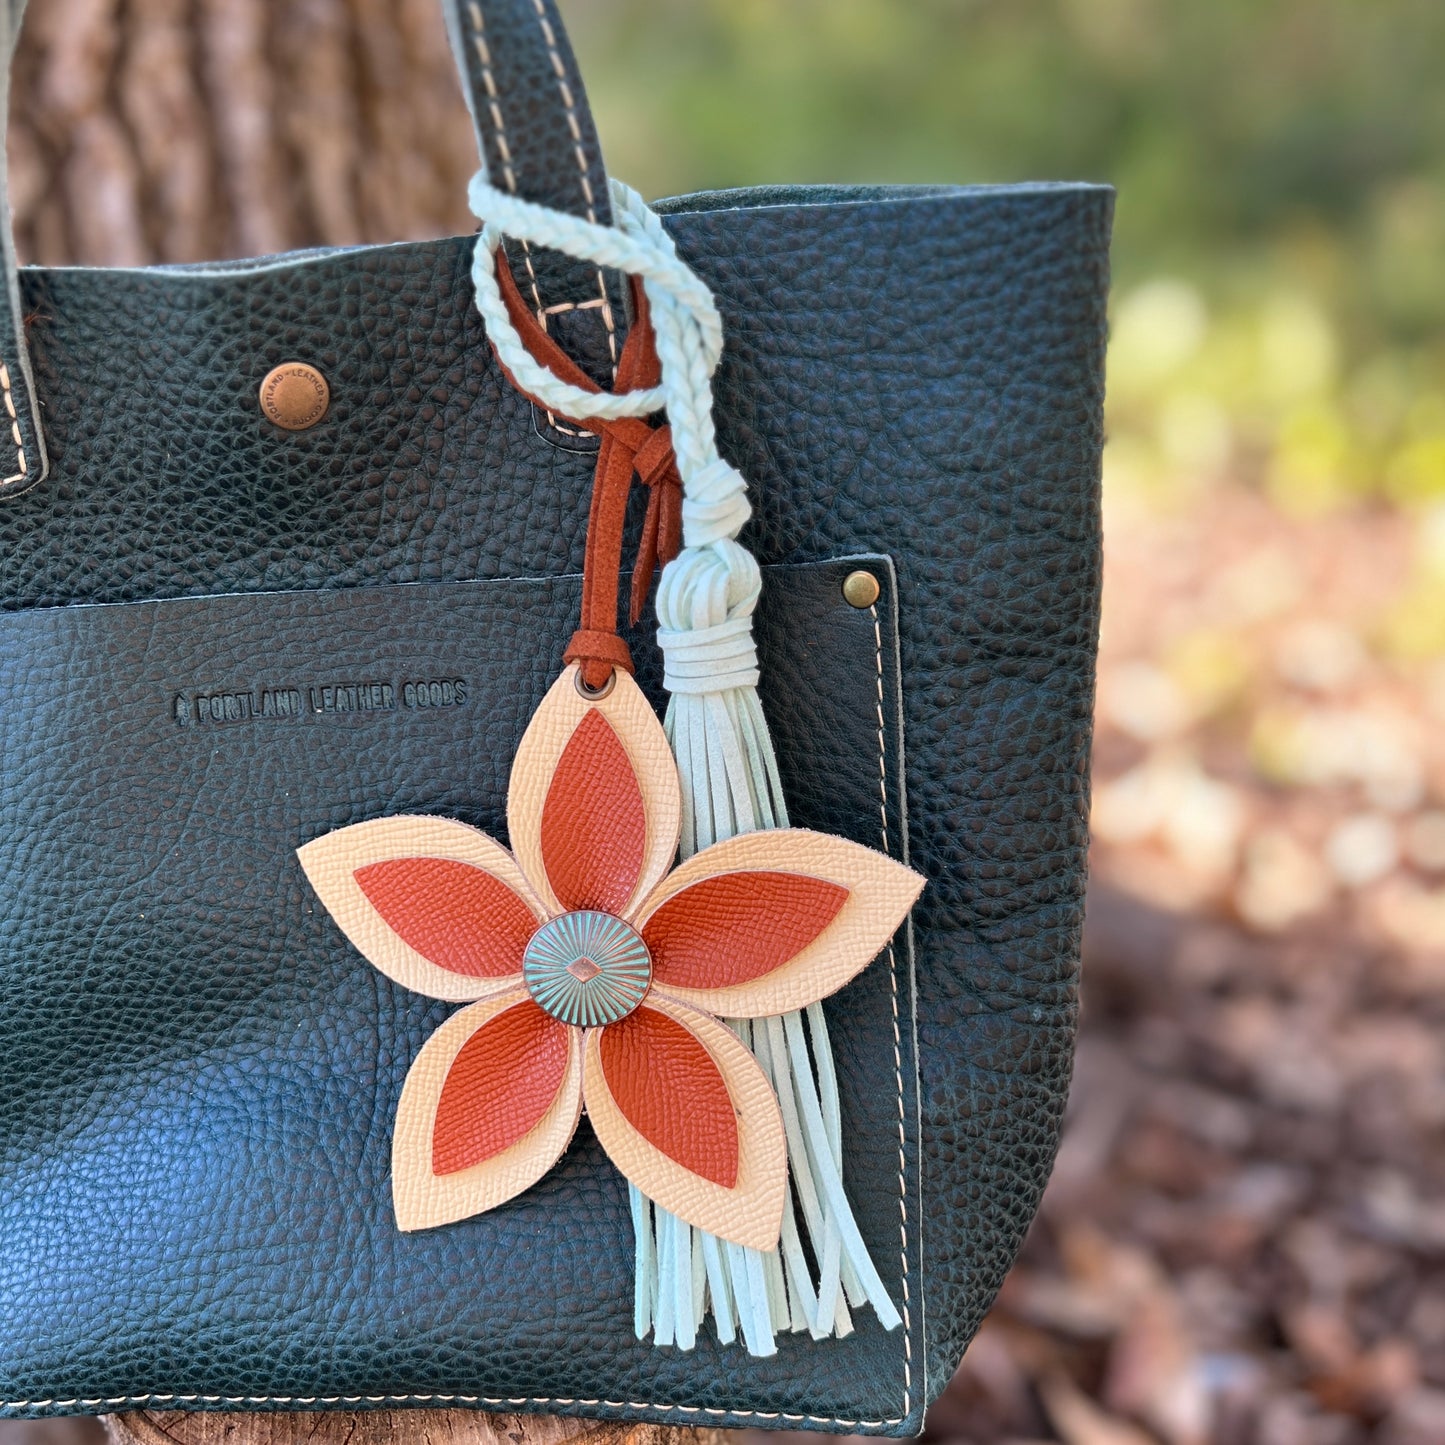 Leather Flower Bag Charm - Large Flower with Loop - Buttercream and Orange